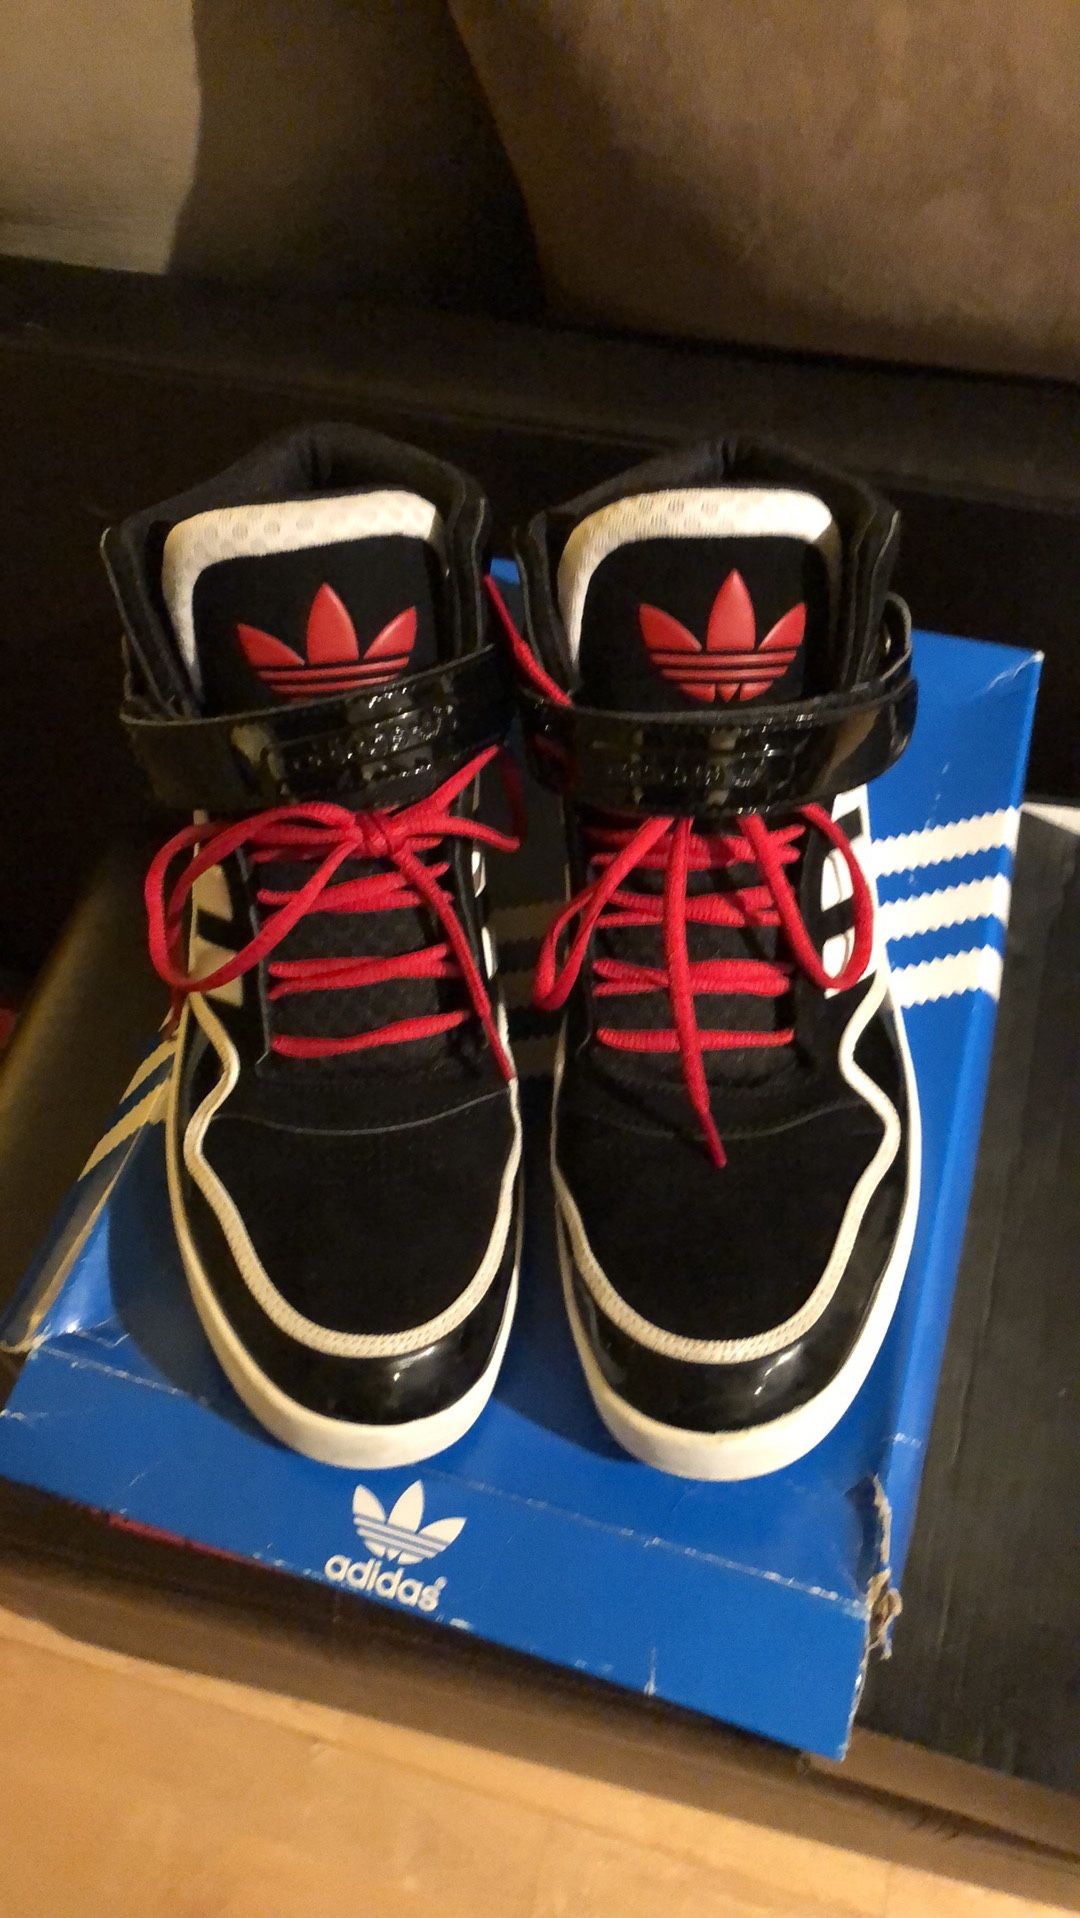 Adidas Basketball Sneakers / SIZE 12 US Mens